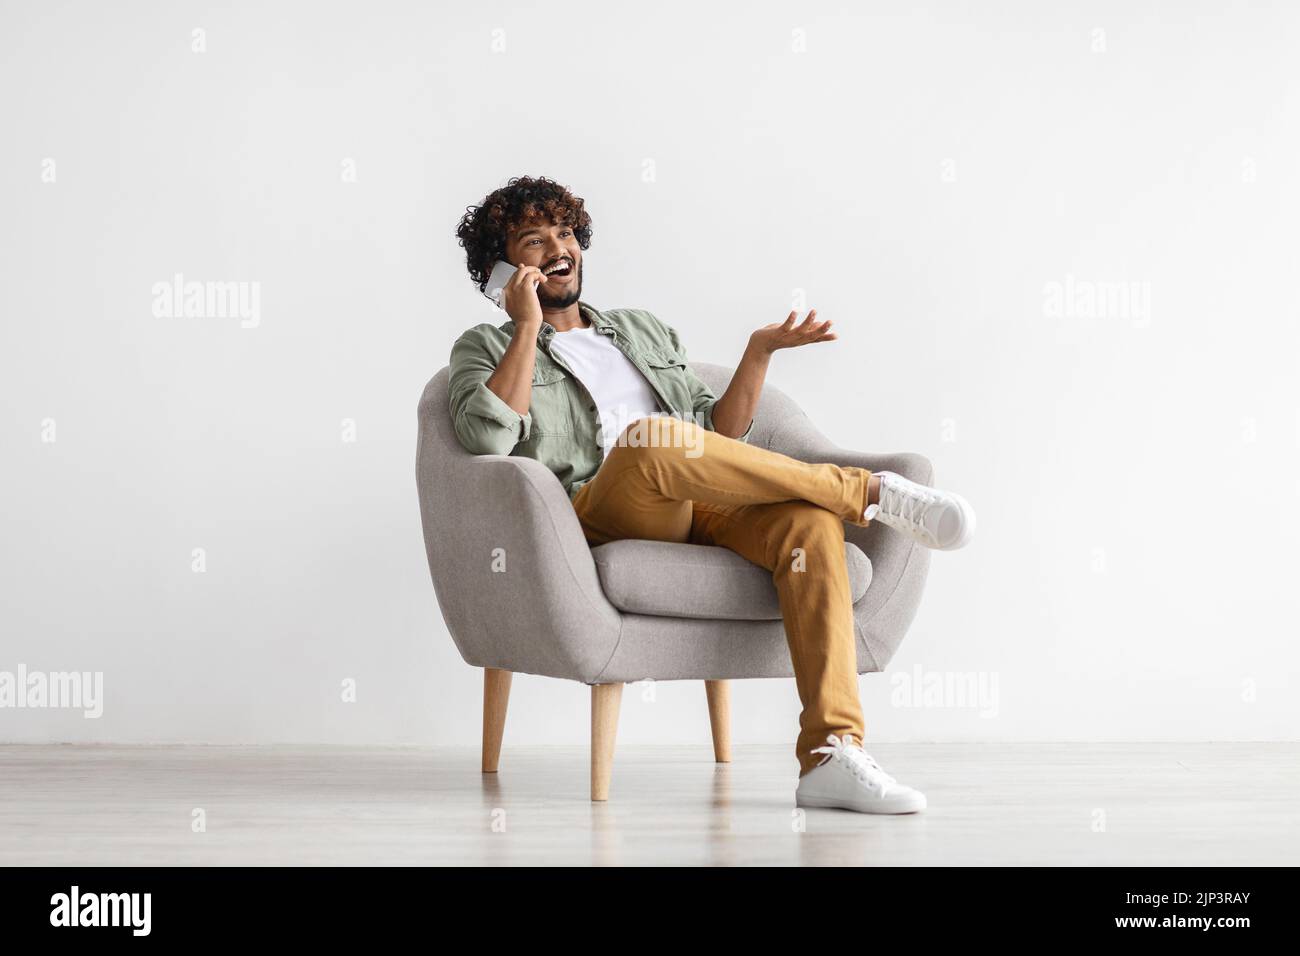 Cool eastern young man having phone conversation Stock Photo